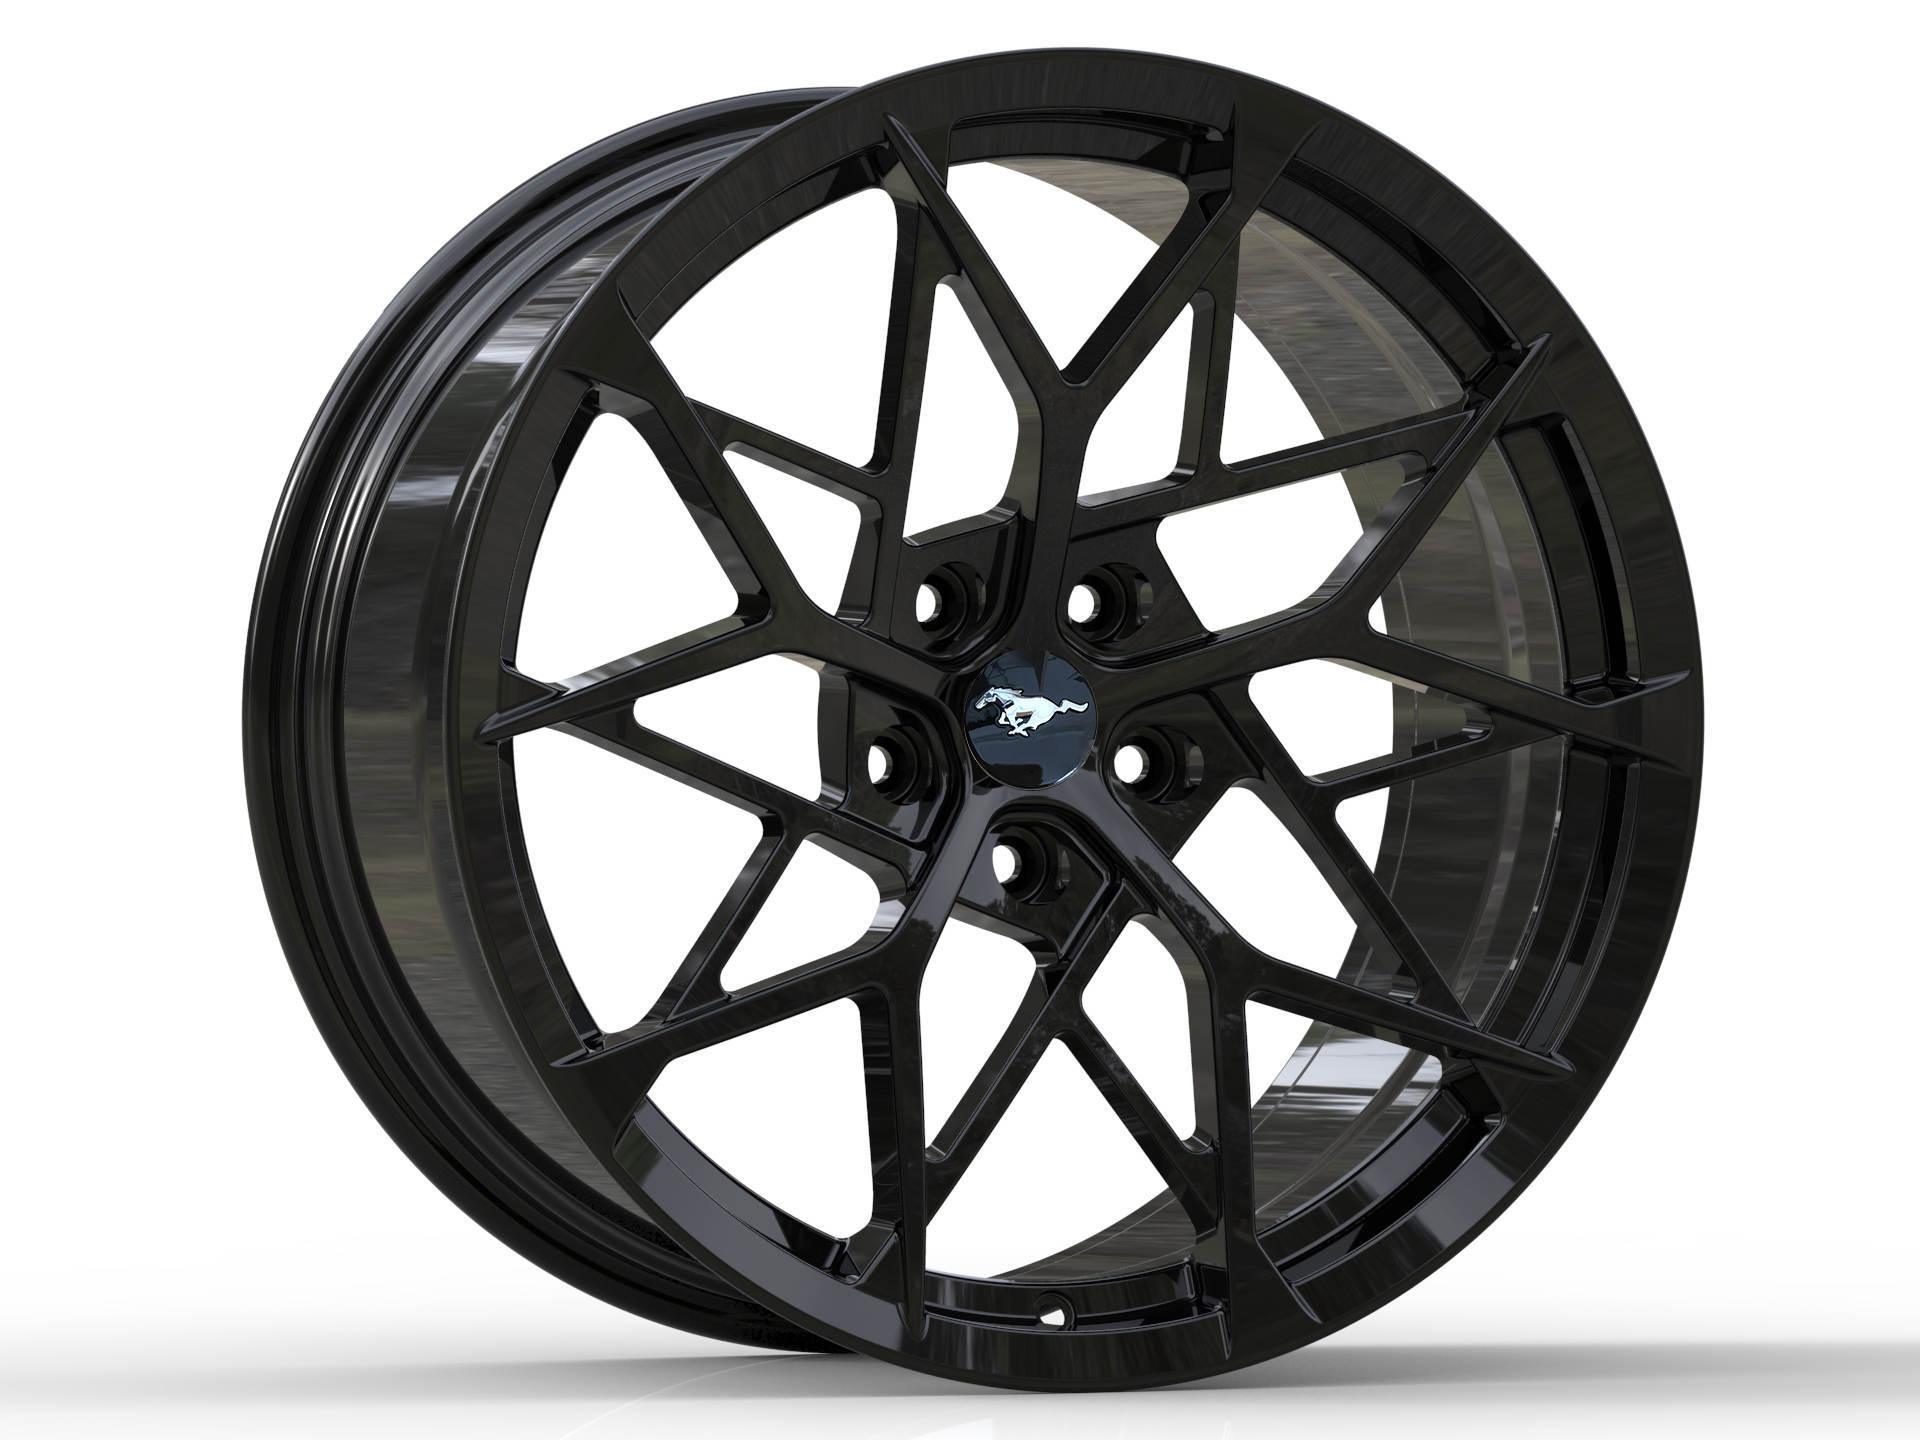 Forged Mach 1 Style wheels 19x10 / 19x11 for Ford Mustang GT, ECO, V6 - Gem Motorsports